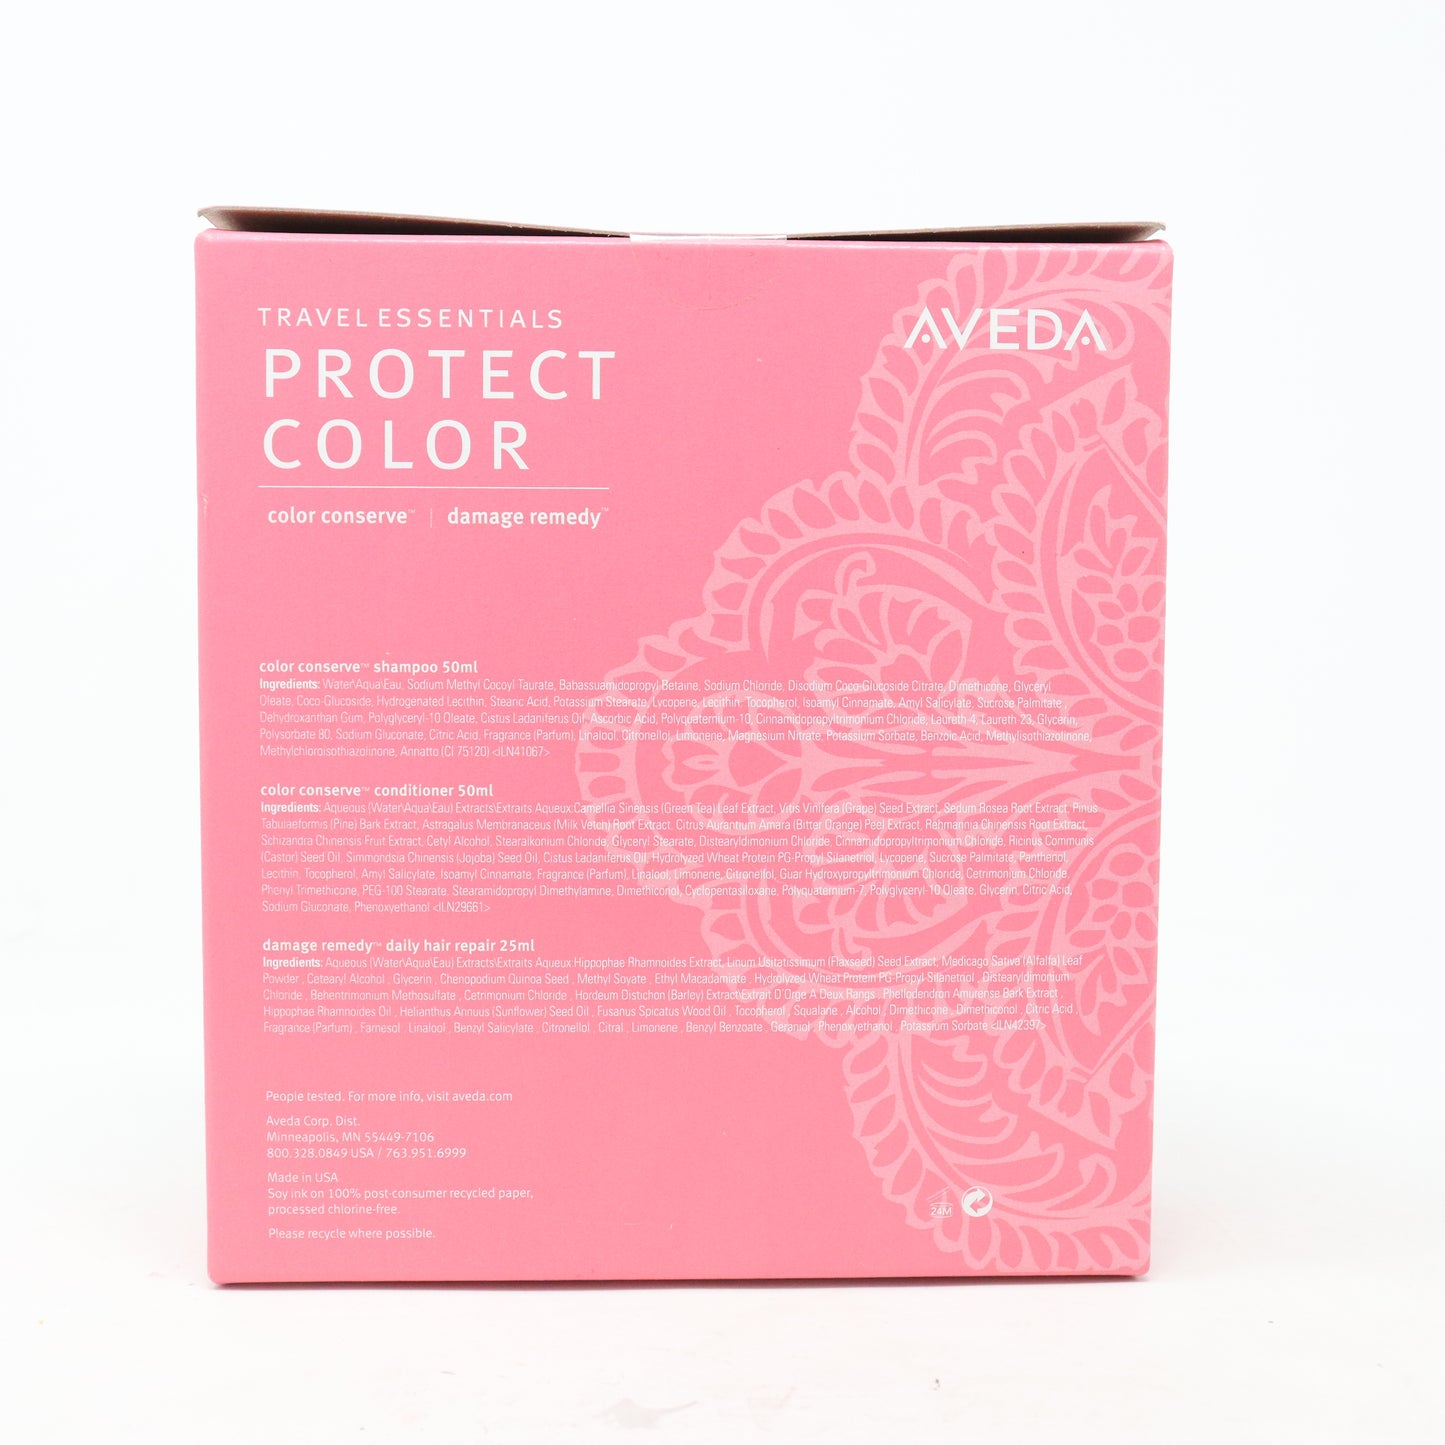 Aveda Travel Essentials Protect Color 3 Pcs Set  / New With Box